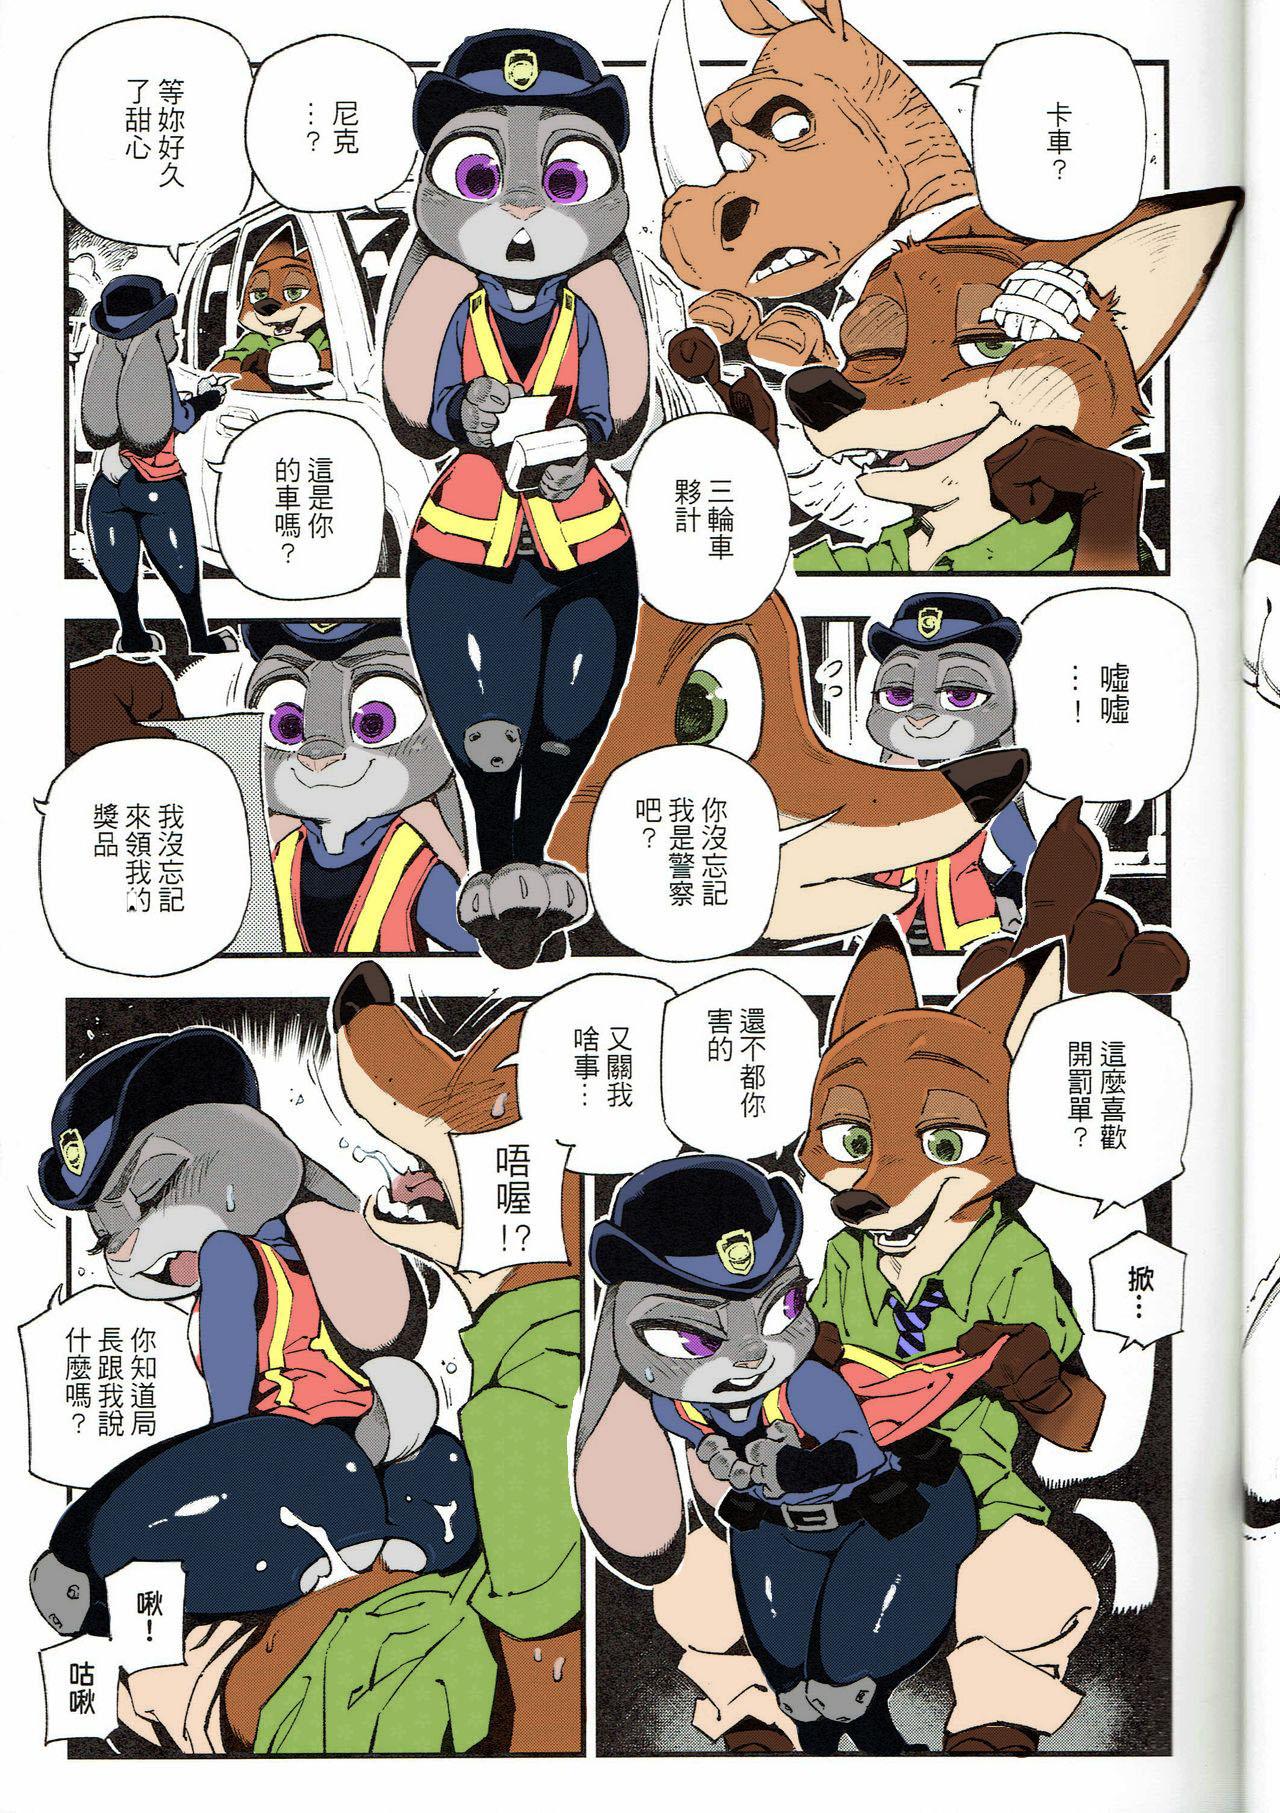 Naked Women Fucking What Does The Fox Say? - Zootopia Verga - Page 11